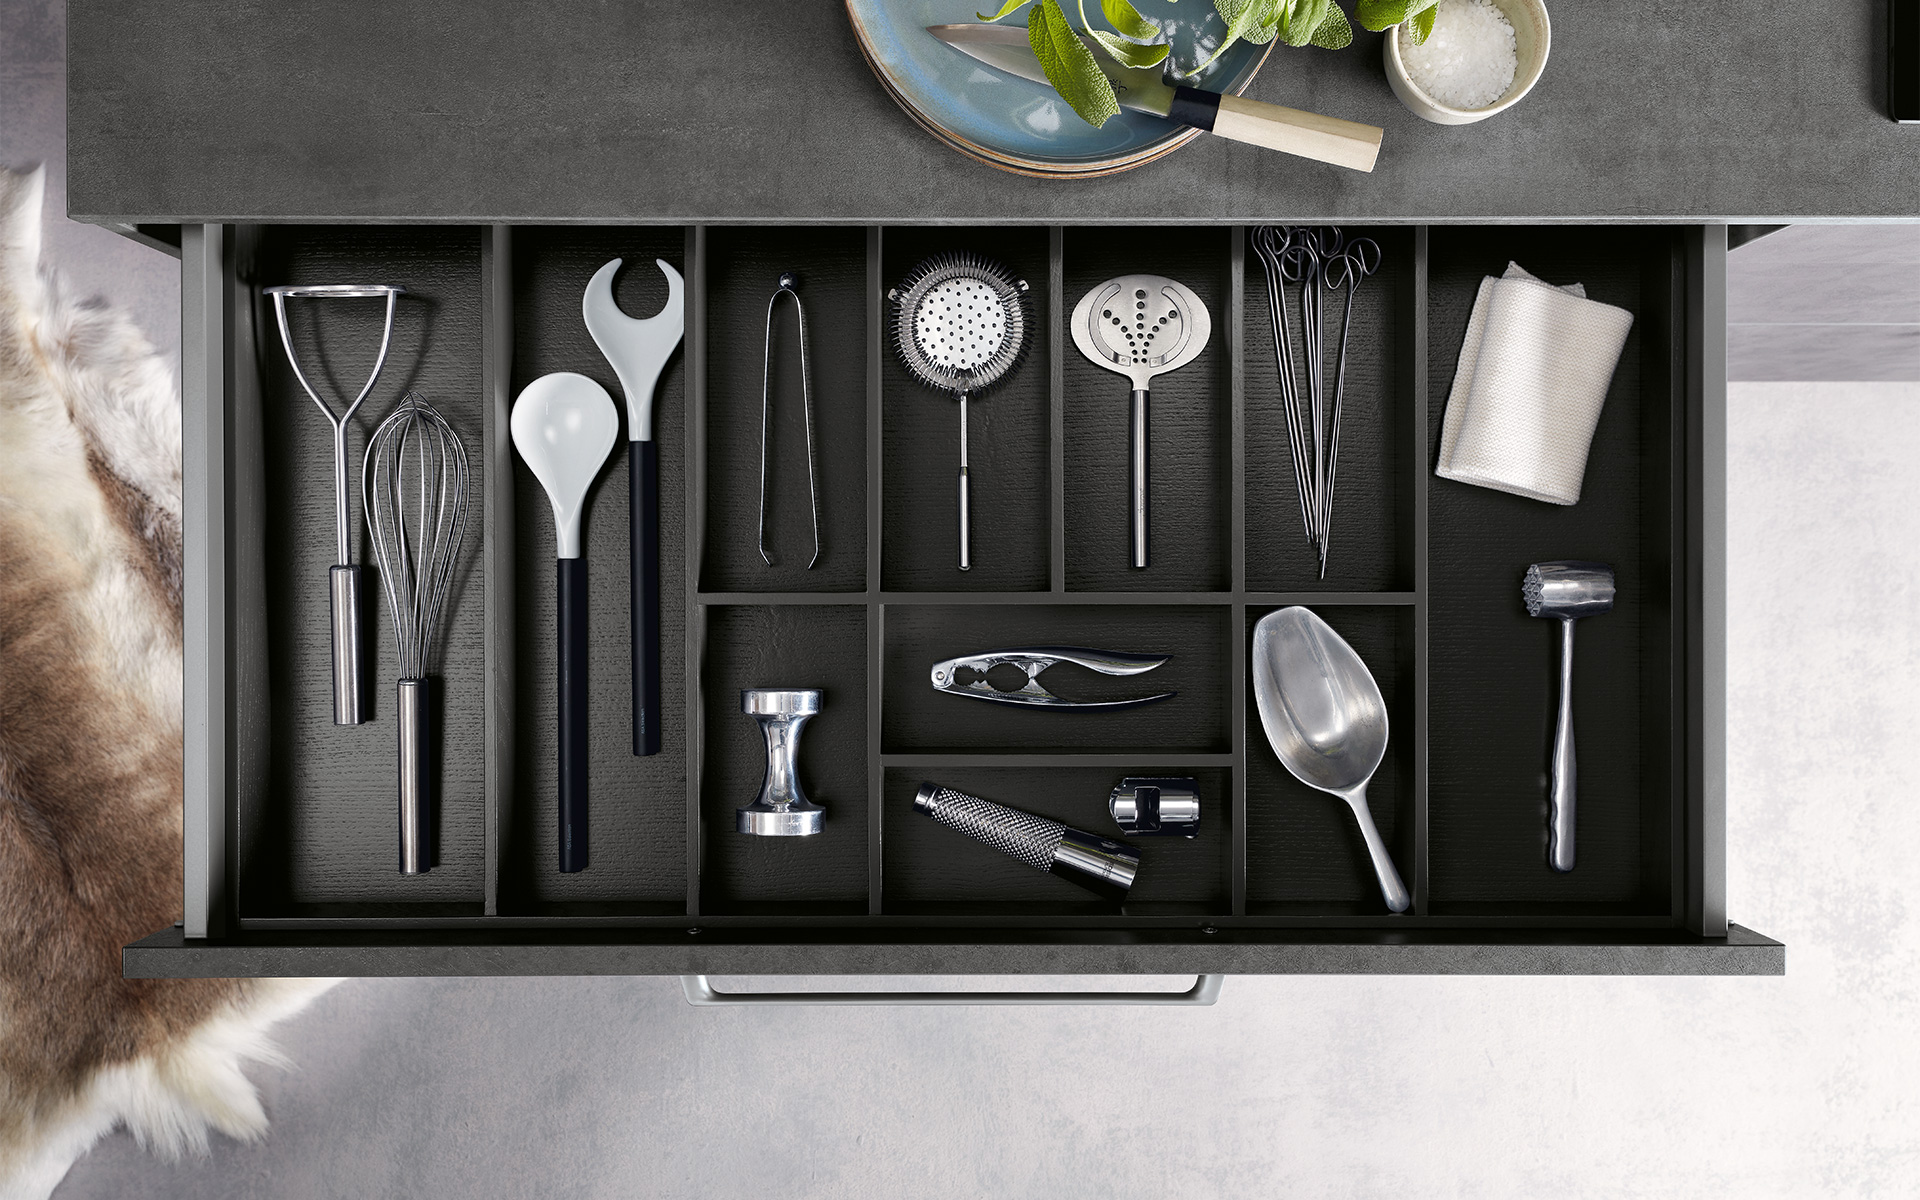 kitchen Interior spatial new a miracle from smart becomes Your with organisation for your kitchen. organisation Häcker